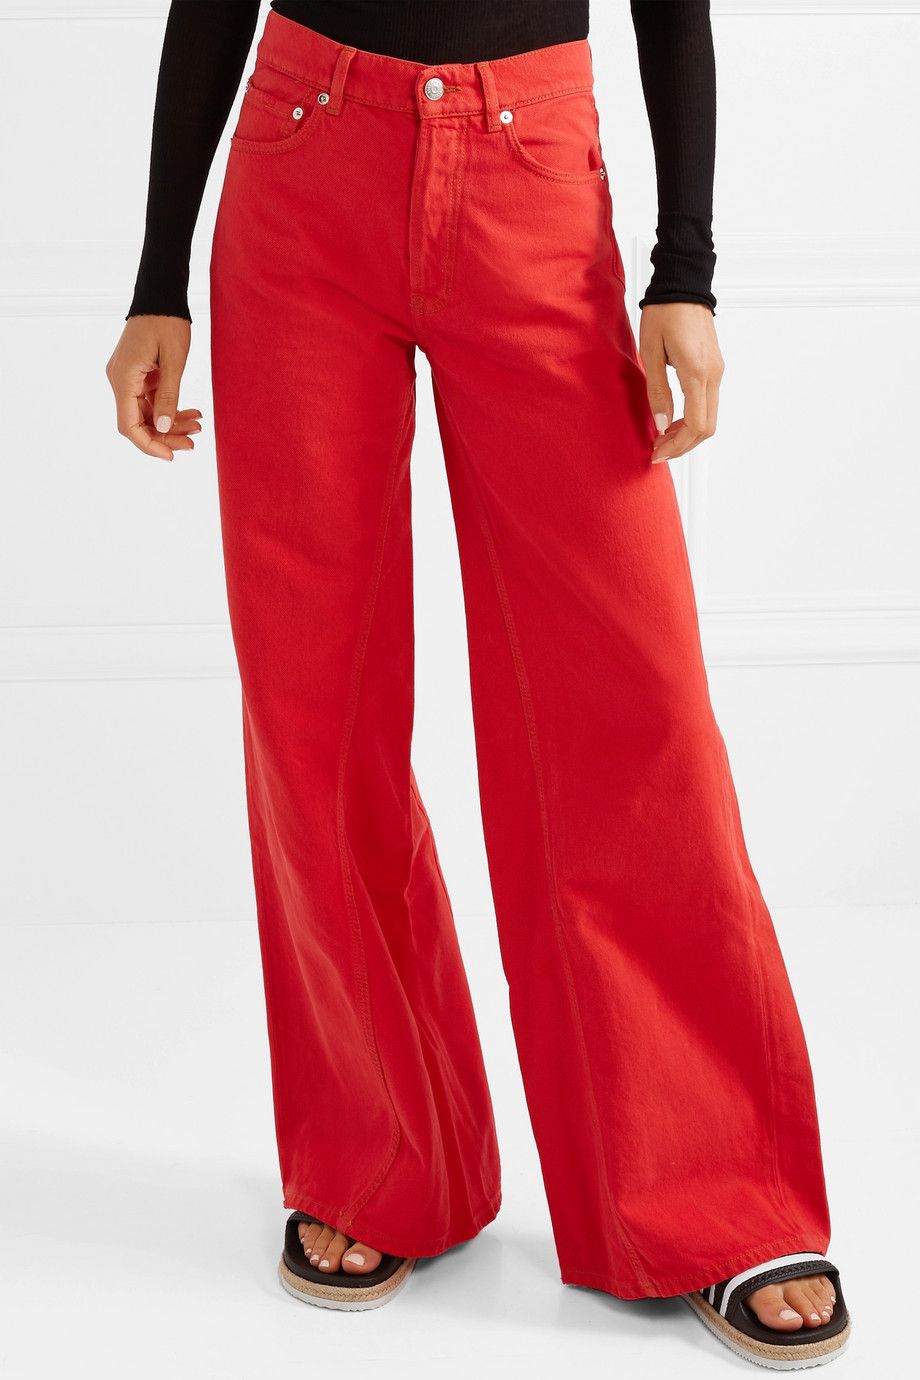 These Standout Red Jeans